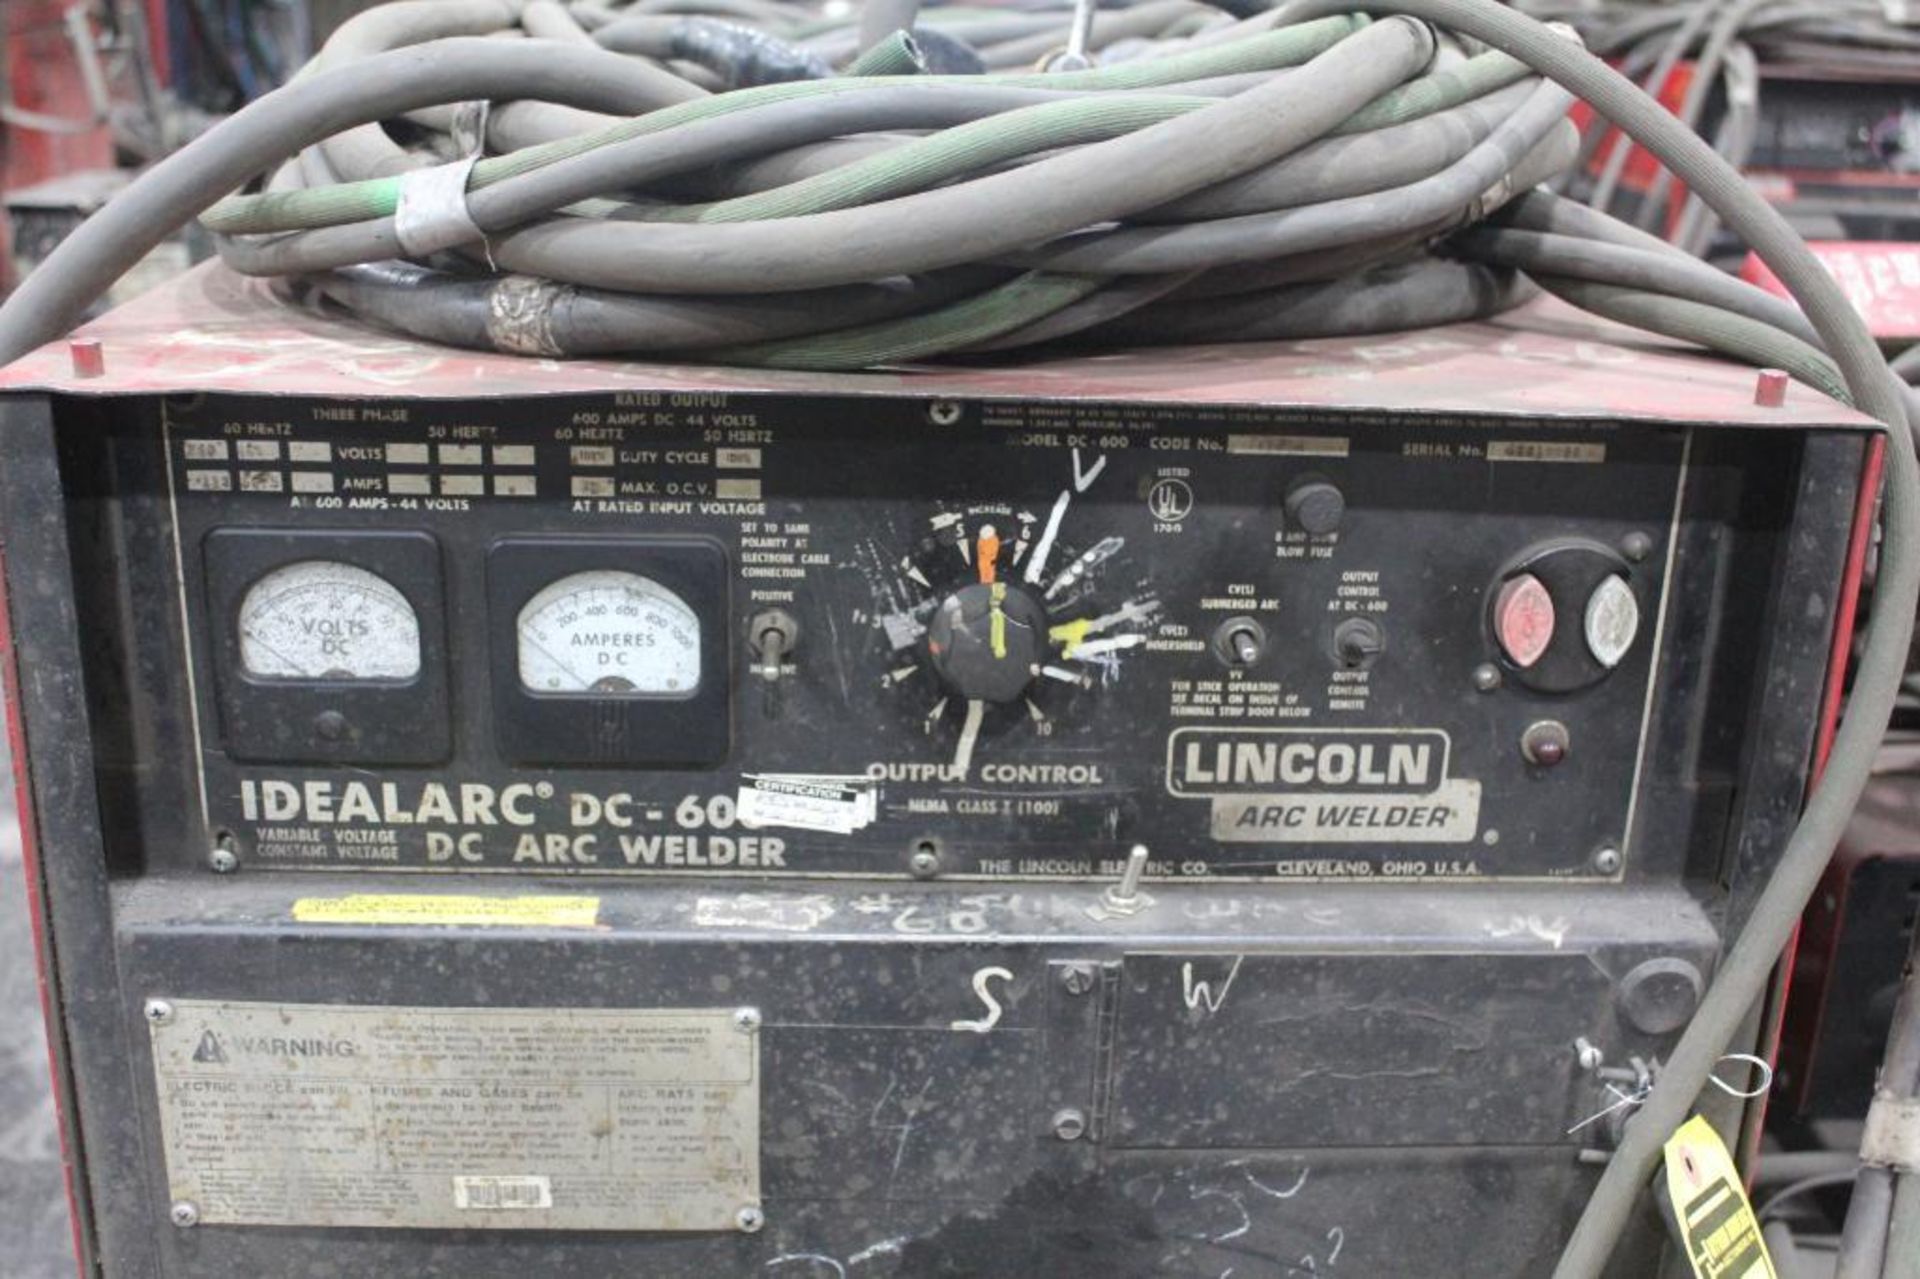 LINCOLN ELECTRIC IDEALARC DC-600 WELDER SN.AC684483 230-460V WITH LN-8 WIRE FEED SN.U1110613415 - Image 7 of 11